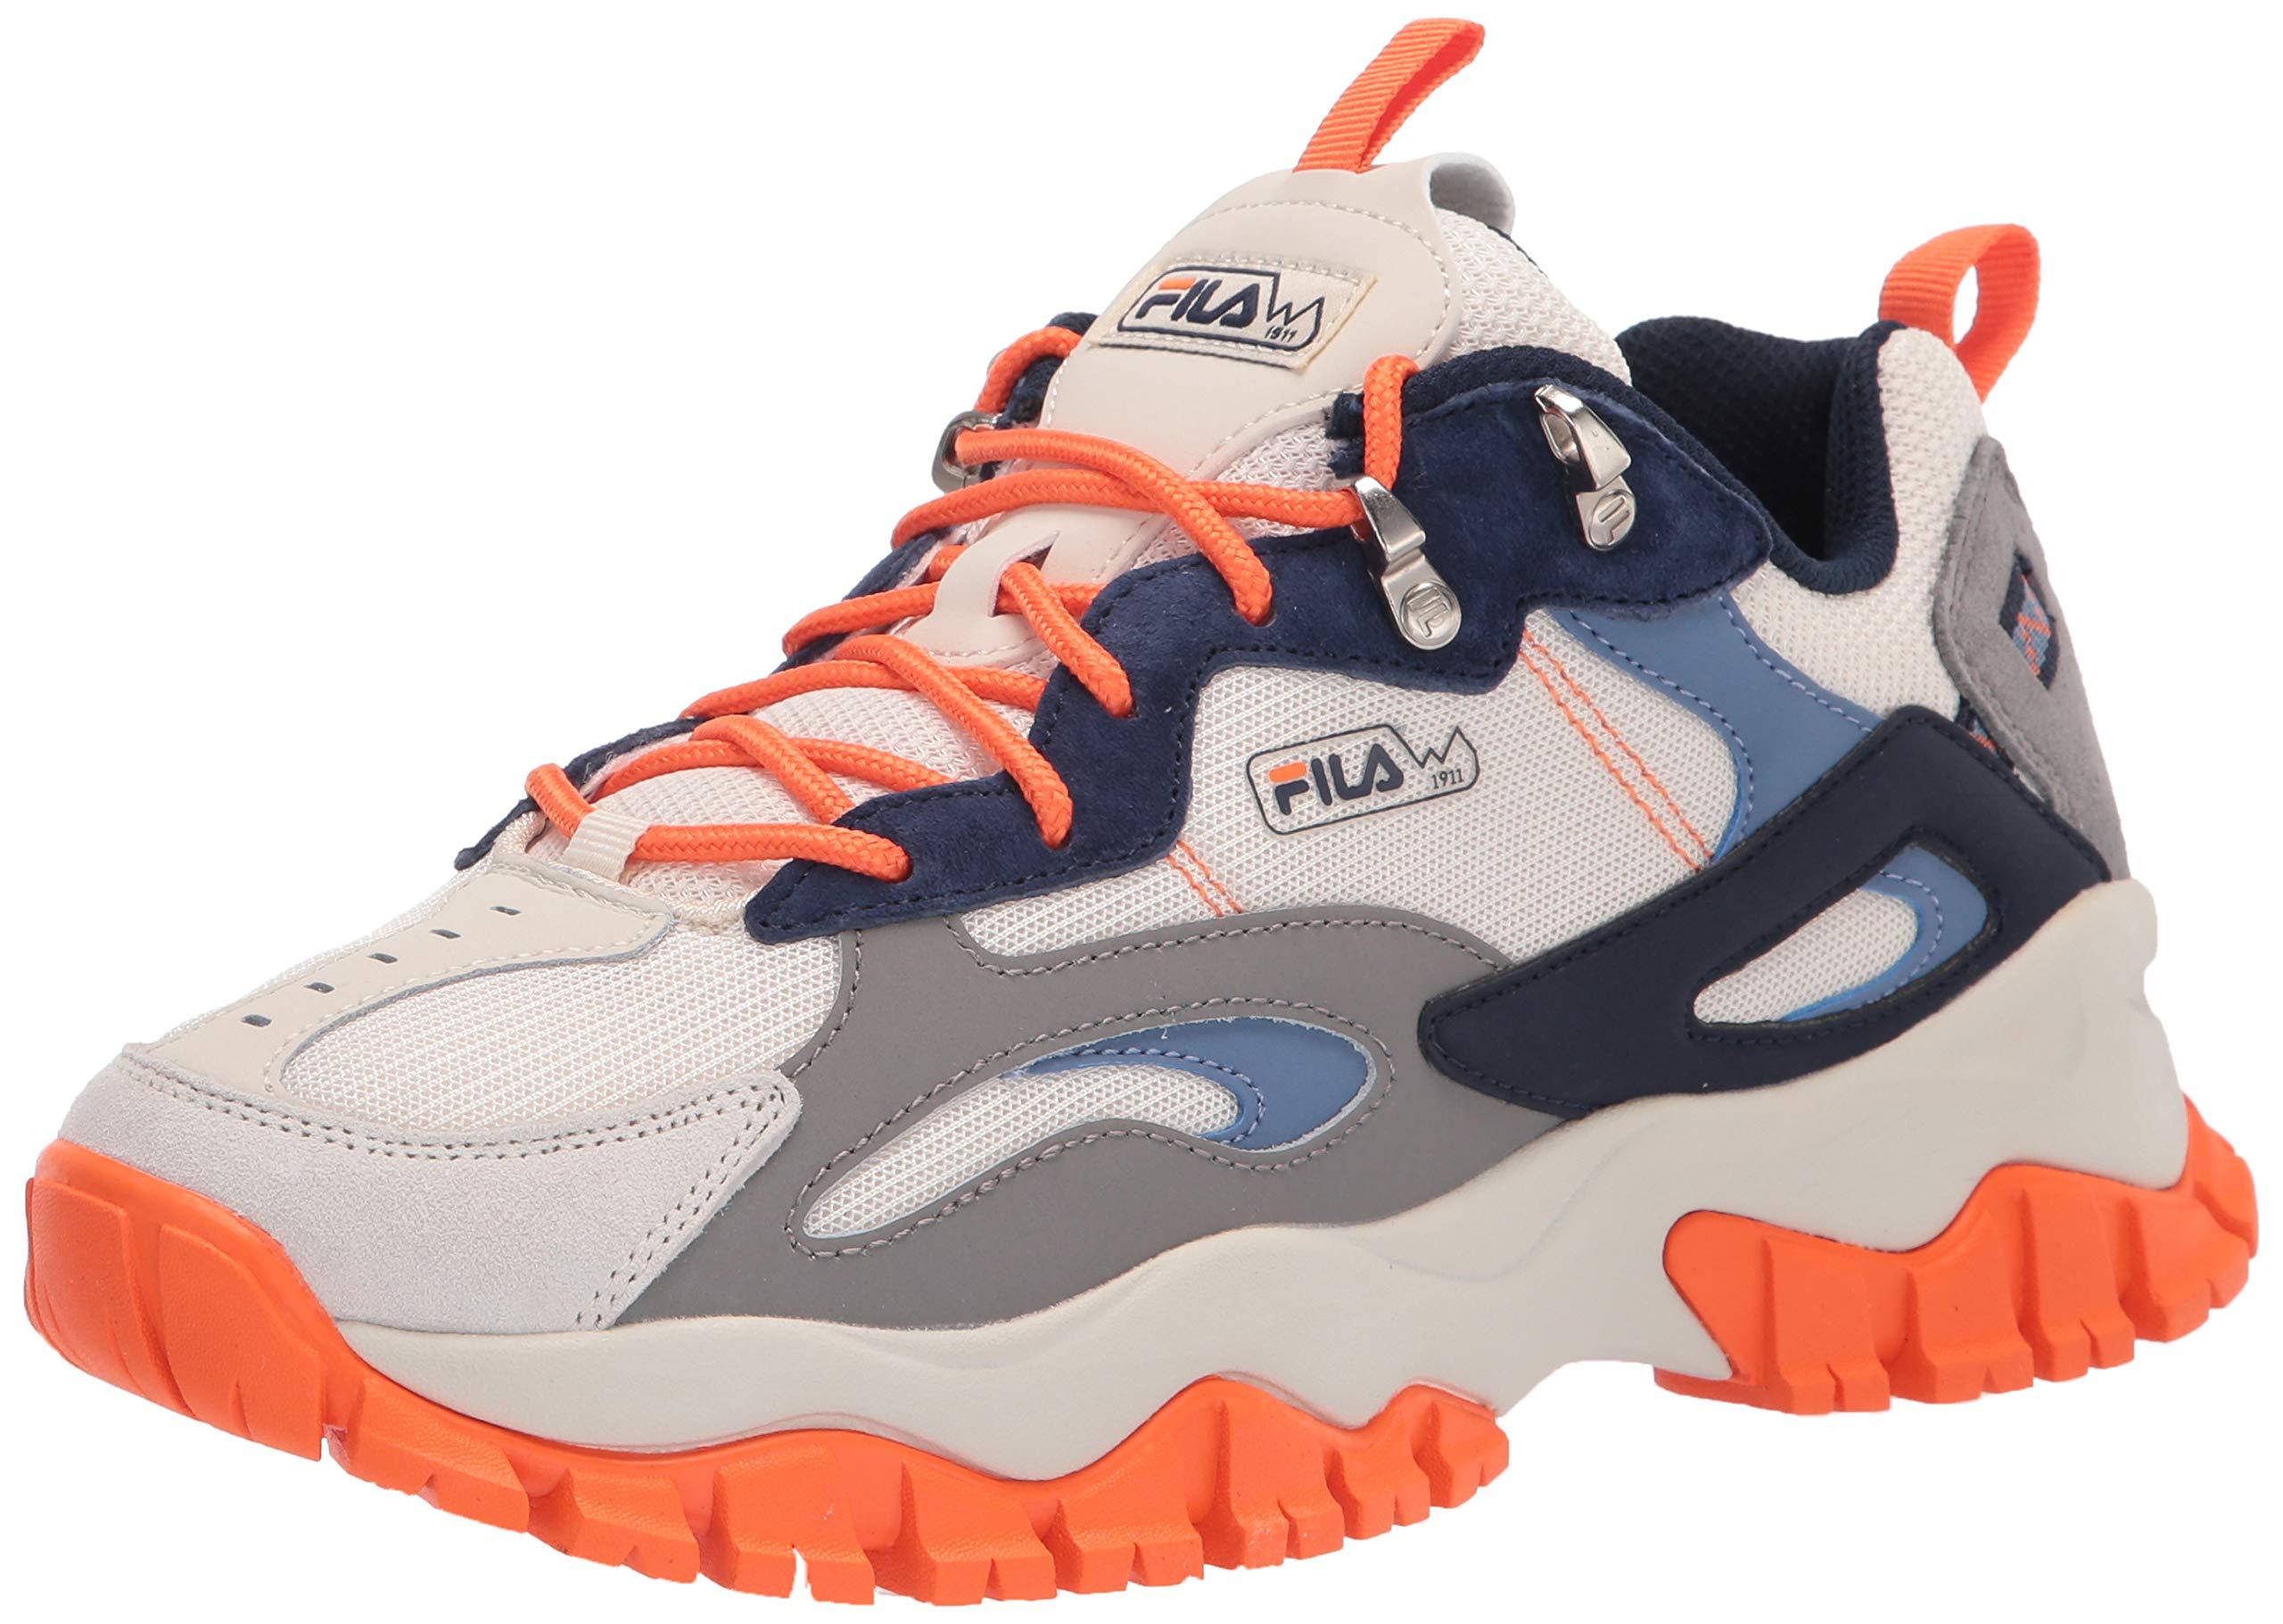 Buy Fila Ray Tracer White Sneakers for Women at Best Price @ Tata CLiQ